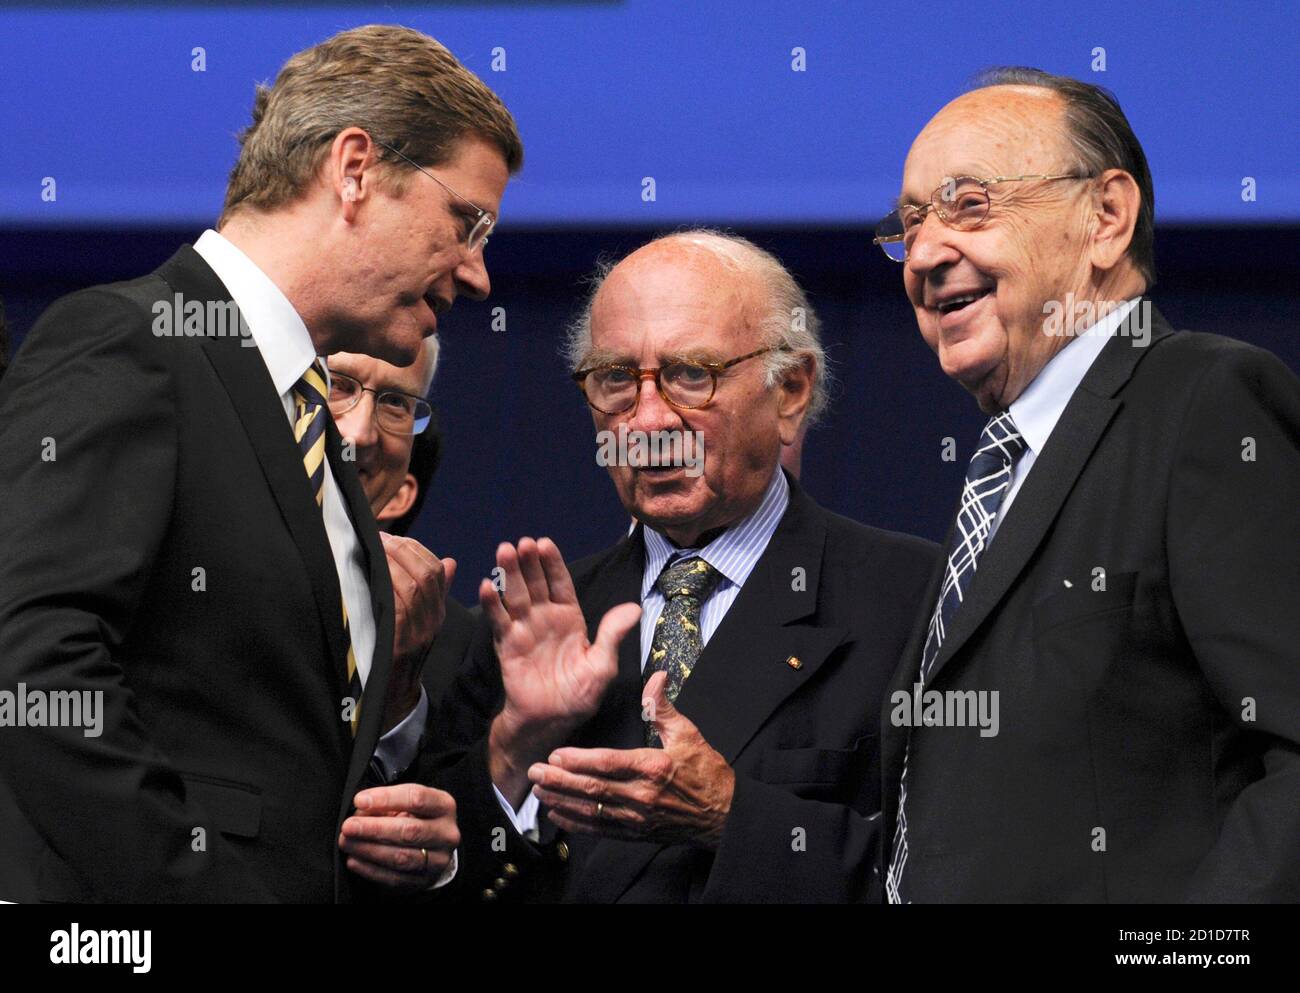 Guido Westerwelle (L), party leader of Germany's liberal Free Democratic Party (FDP) speaks to former FDP leaders Otto Graf Lambsdorff (C) and Hans-Dietrich Genscher following his key-note speech at a three-day FDP party congress in Hanover May 15, 2009.   REUTERS/Wolfgang Rattay    (GERMANY) Stock Photo